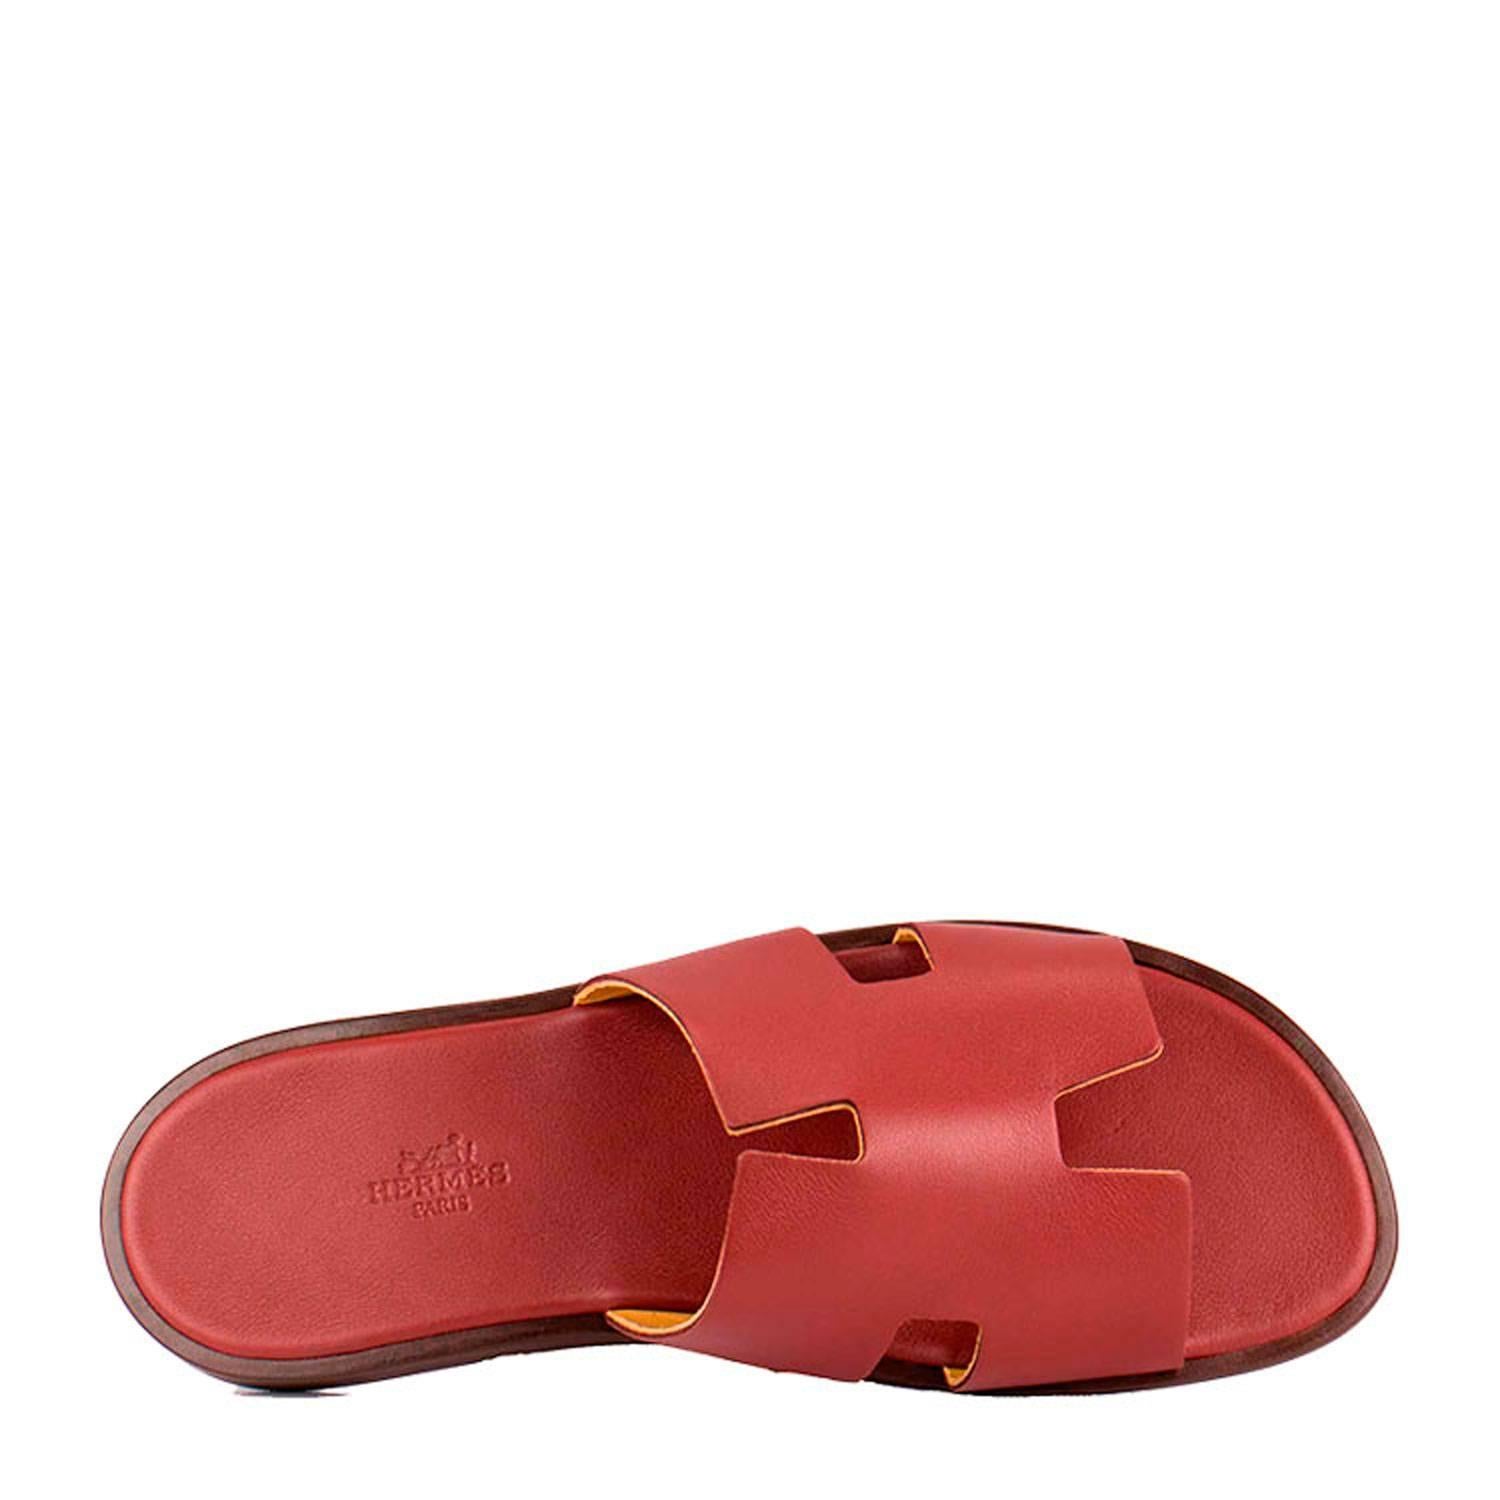 Hermes Sandals Izmir  leather 41 Rouge 2016.

Pre-owned and never used.

Bought it in Hermes store in 2015.

Model; IZMIR.

Composition; Leather.

Size; 41.

Color; Rouge.

 Details:
*Protective felt removed for purposes of